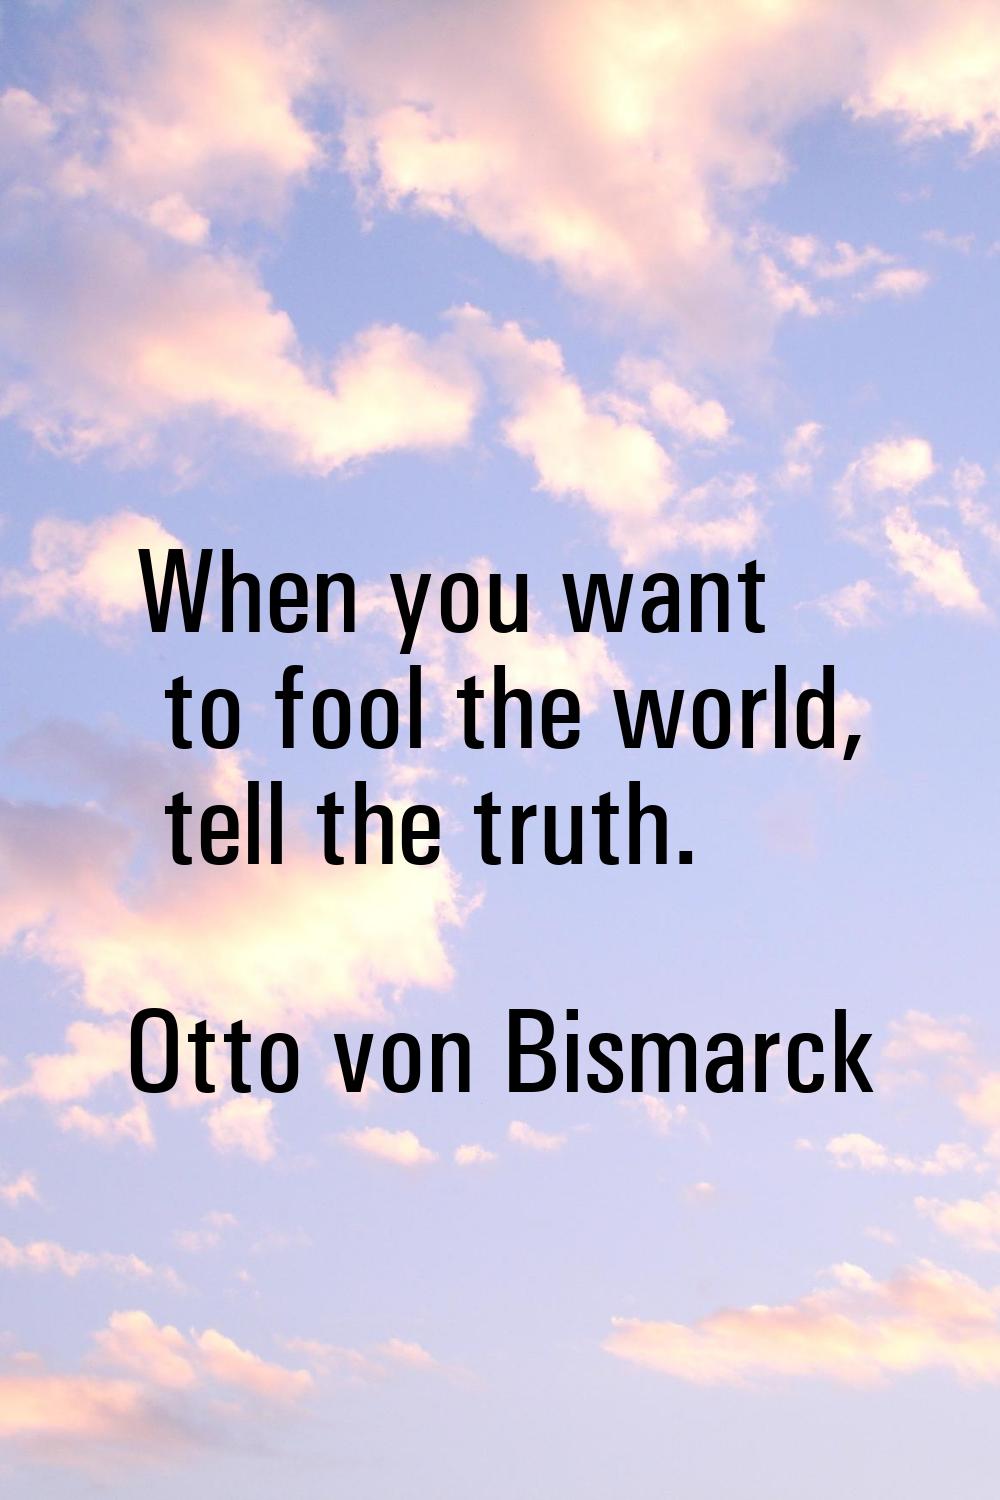 When you want to fool the world, tell the truth.